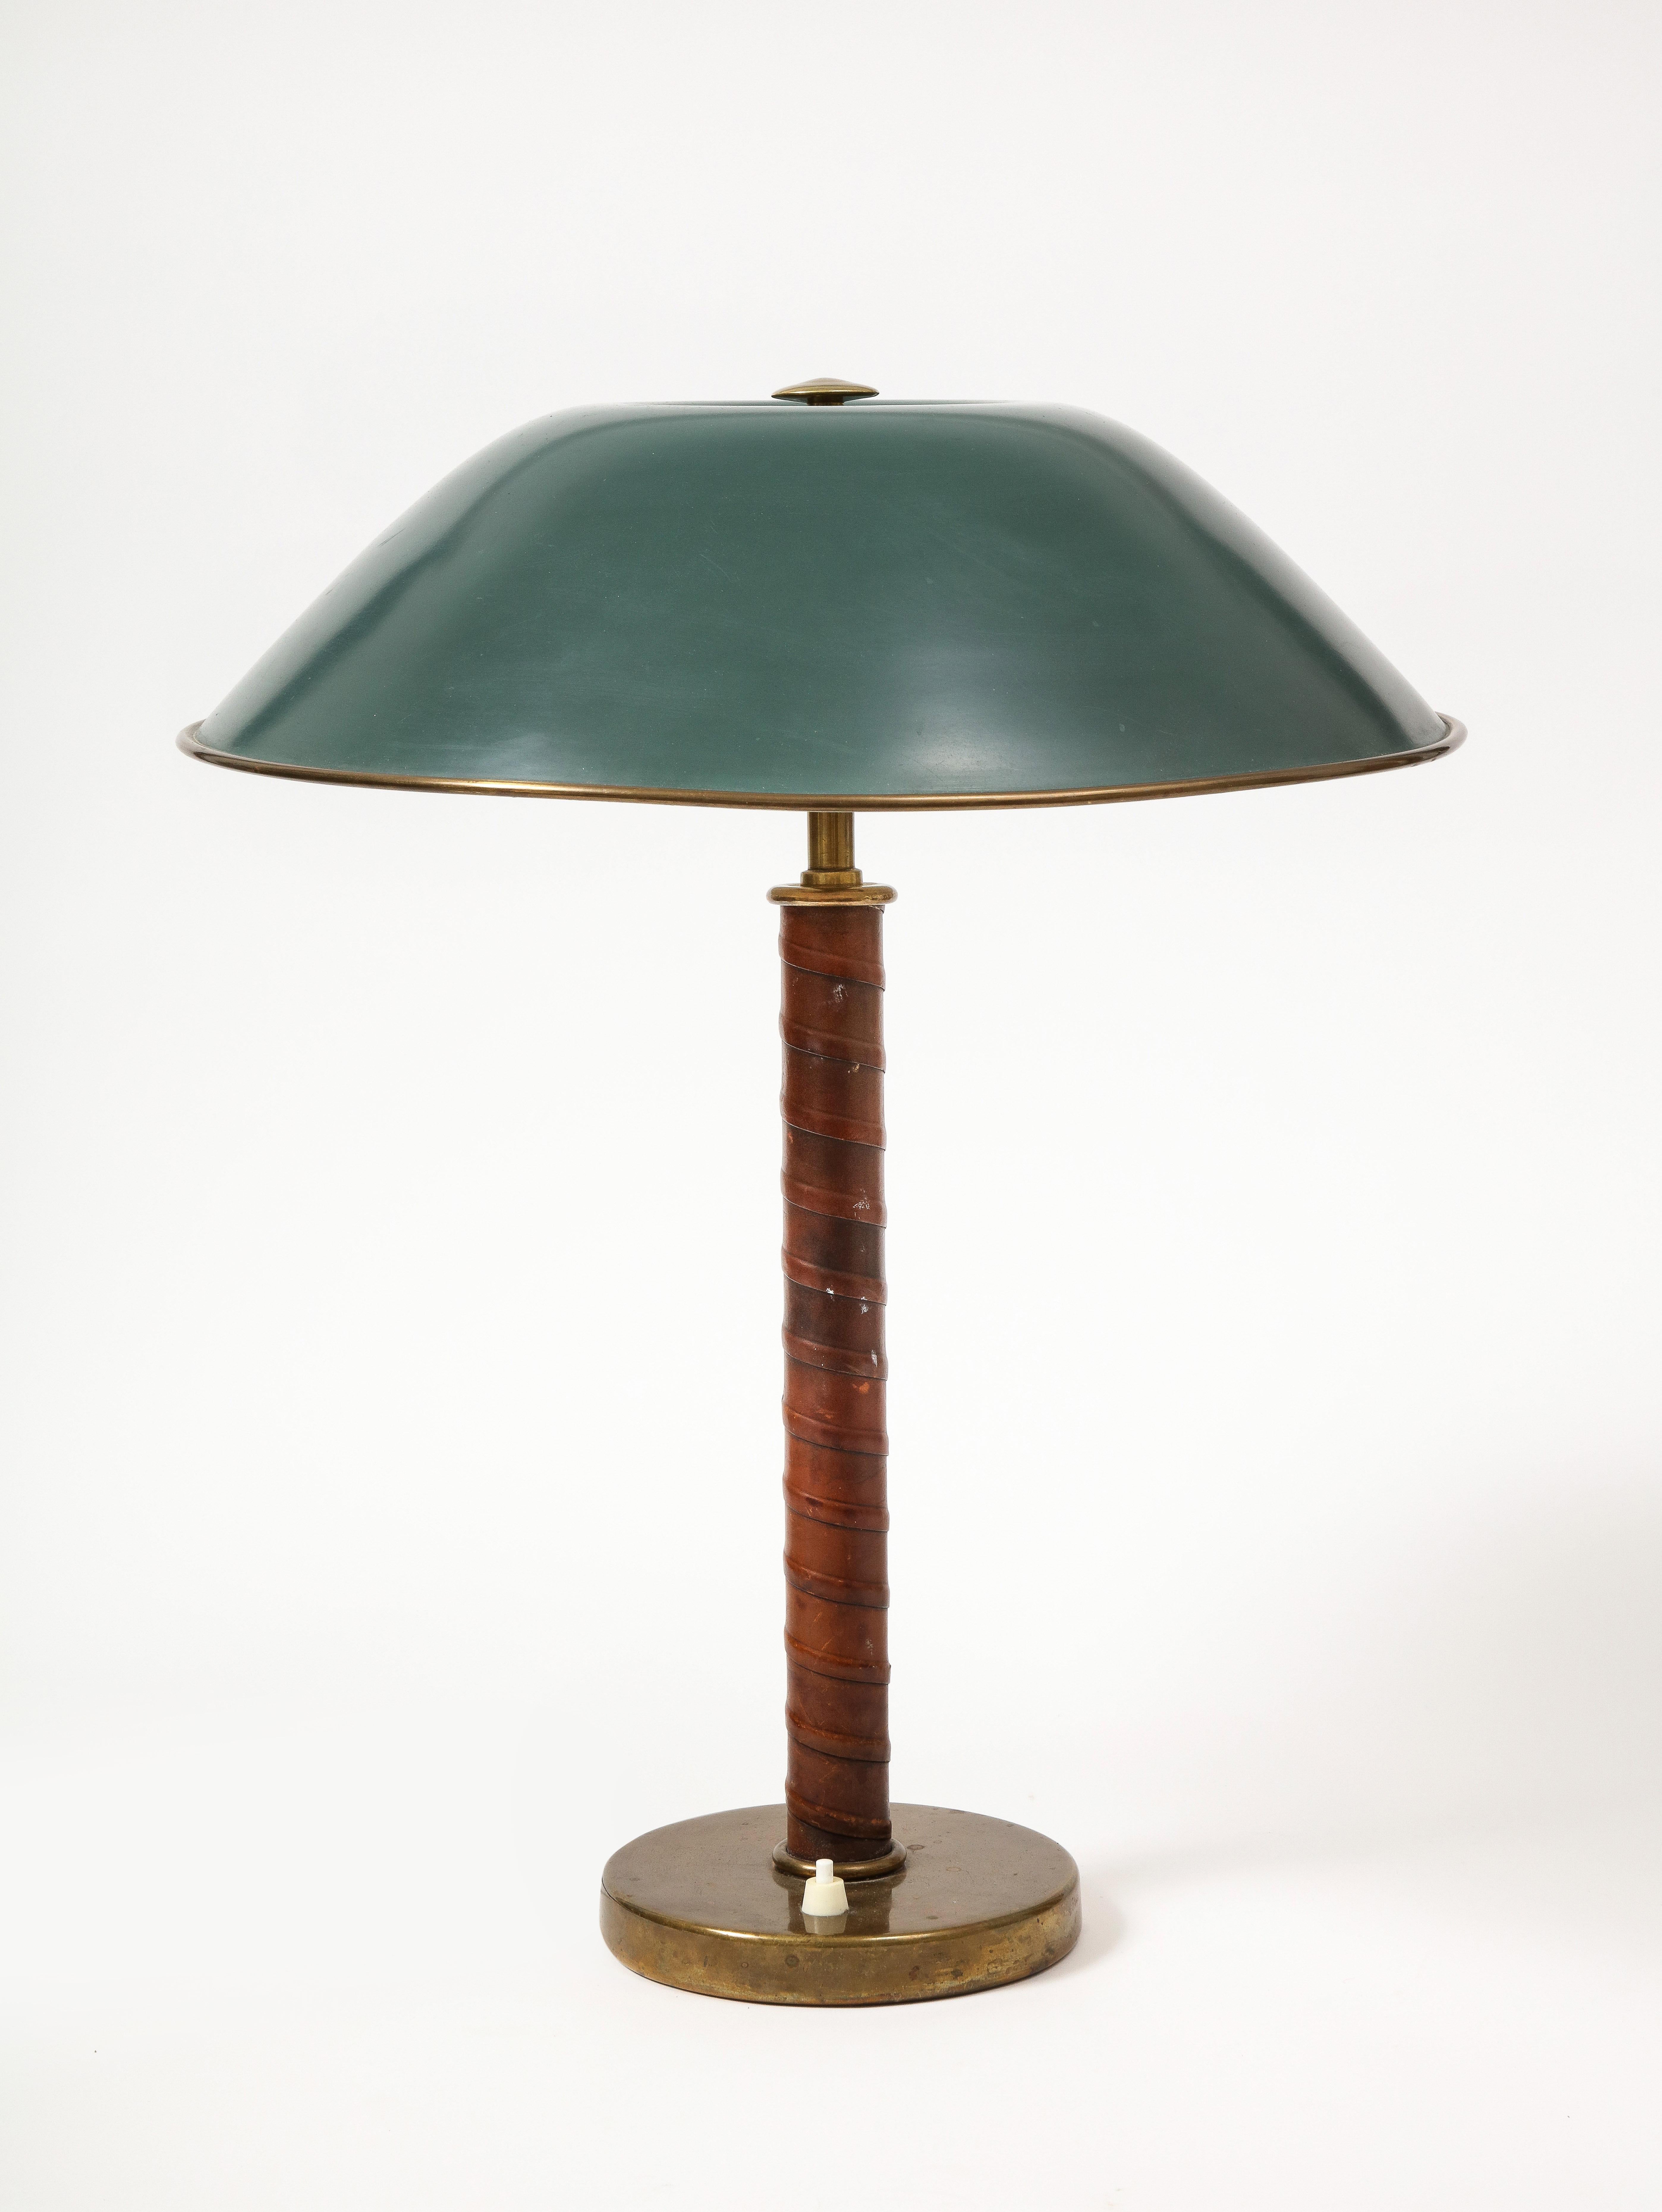 Refined leather, brass, and lacquered brass Swedish Grace table lamp, made by Bohlmarks. This lamp features a wrapped leather body and large beautifully patinated green shade.